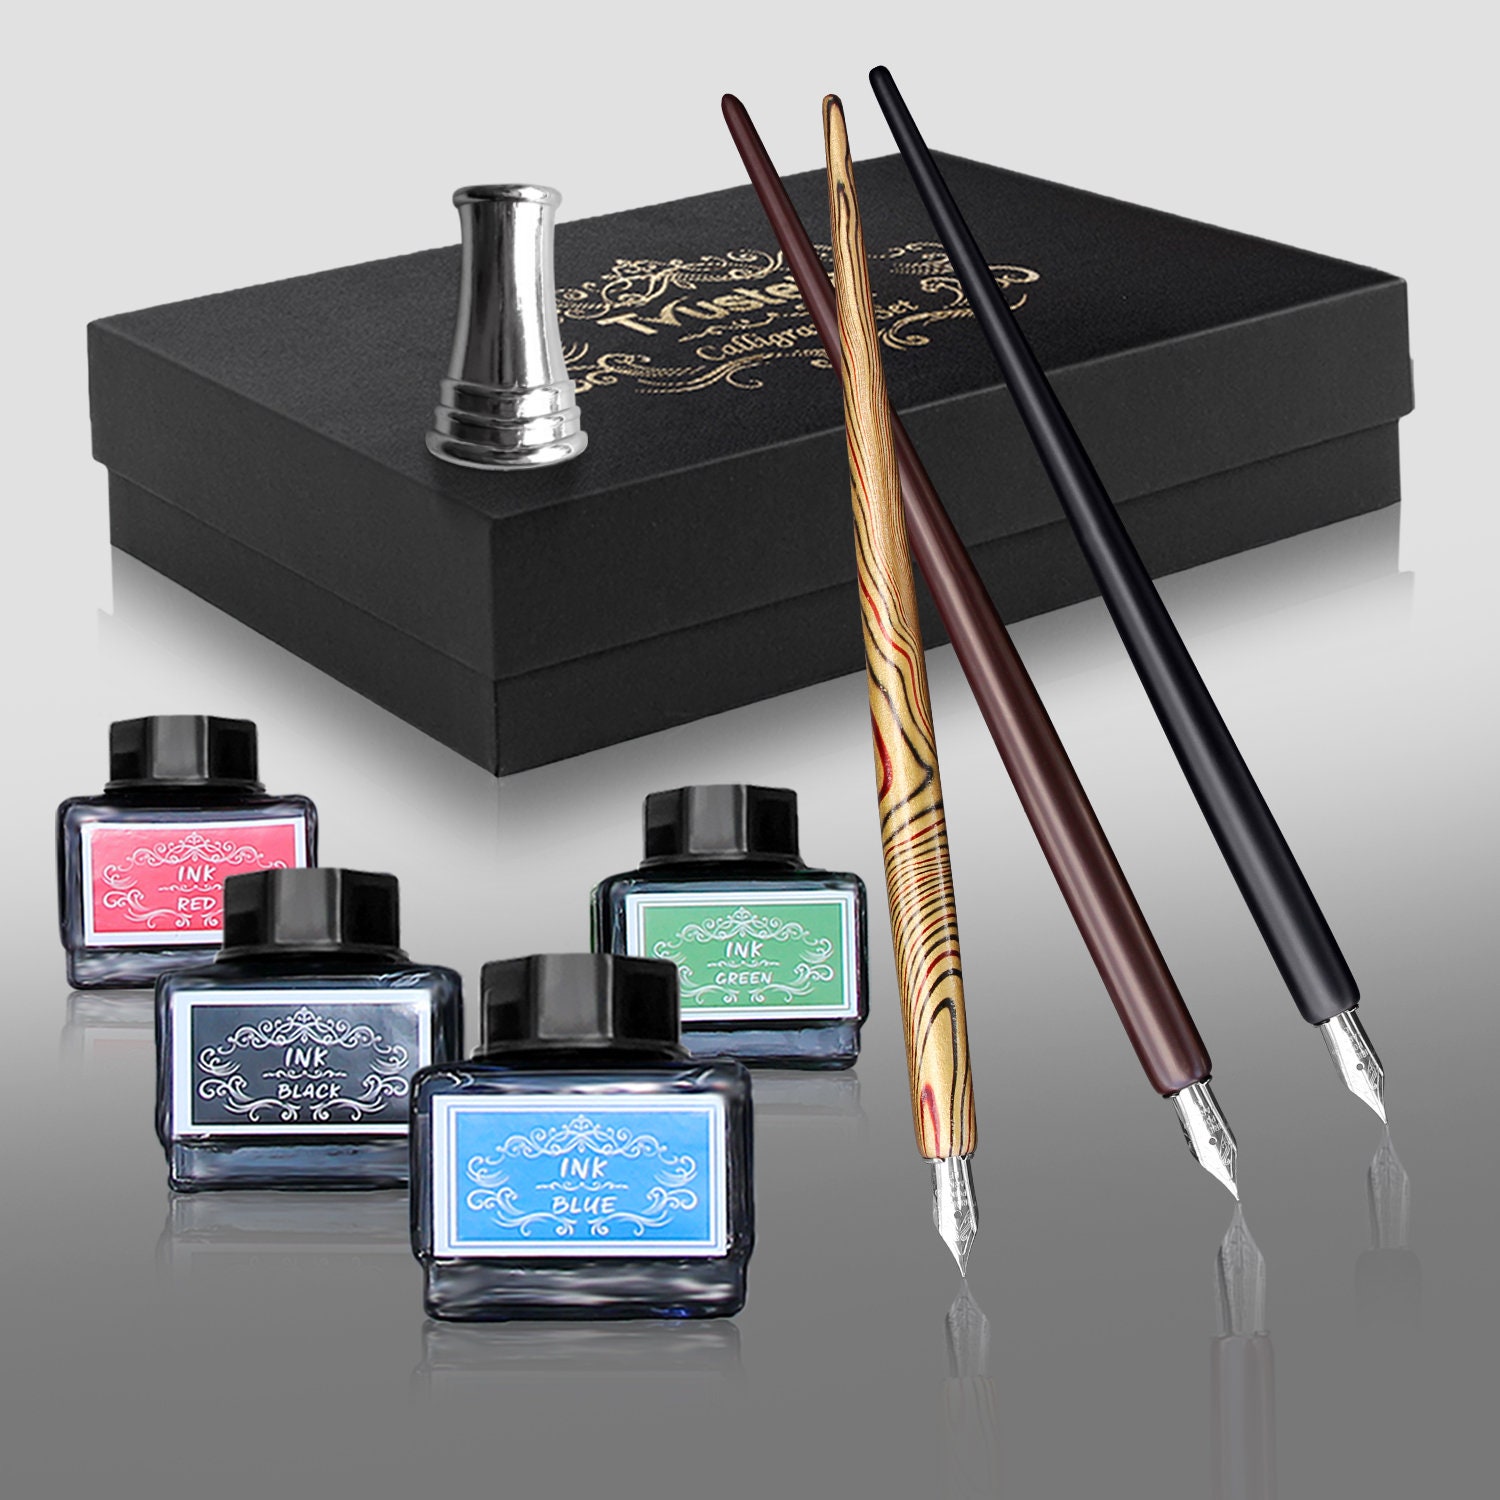 Calligraphy Set for Beginners, Calligraphy Pen Set, Calligraphy Kit,  Feather Pen, Quill Pen, Quill and Ink Set, Feather Pen and Ink 